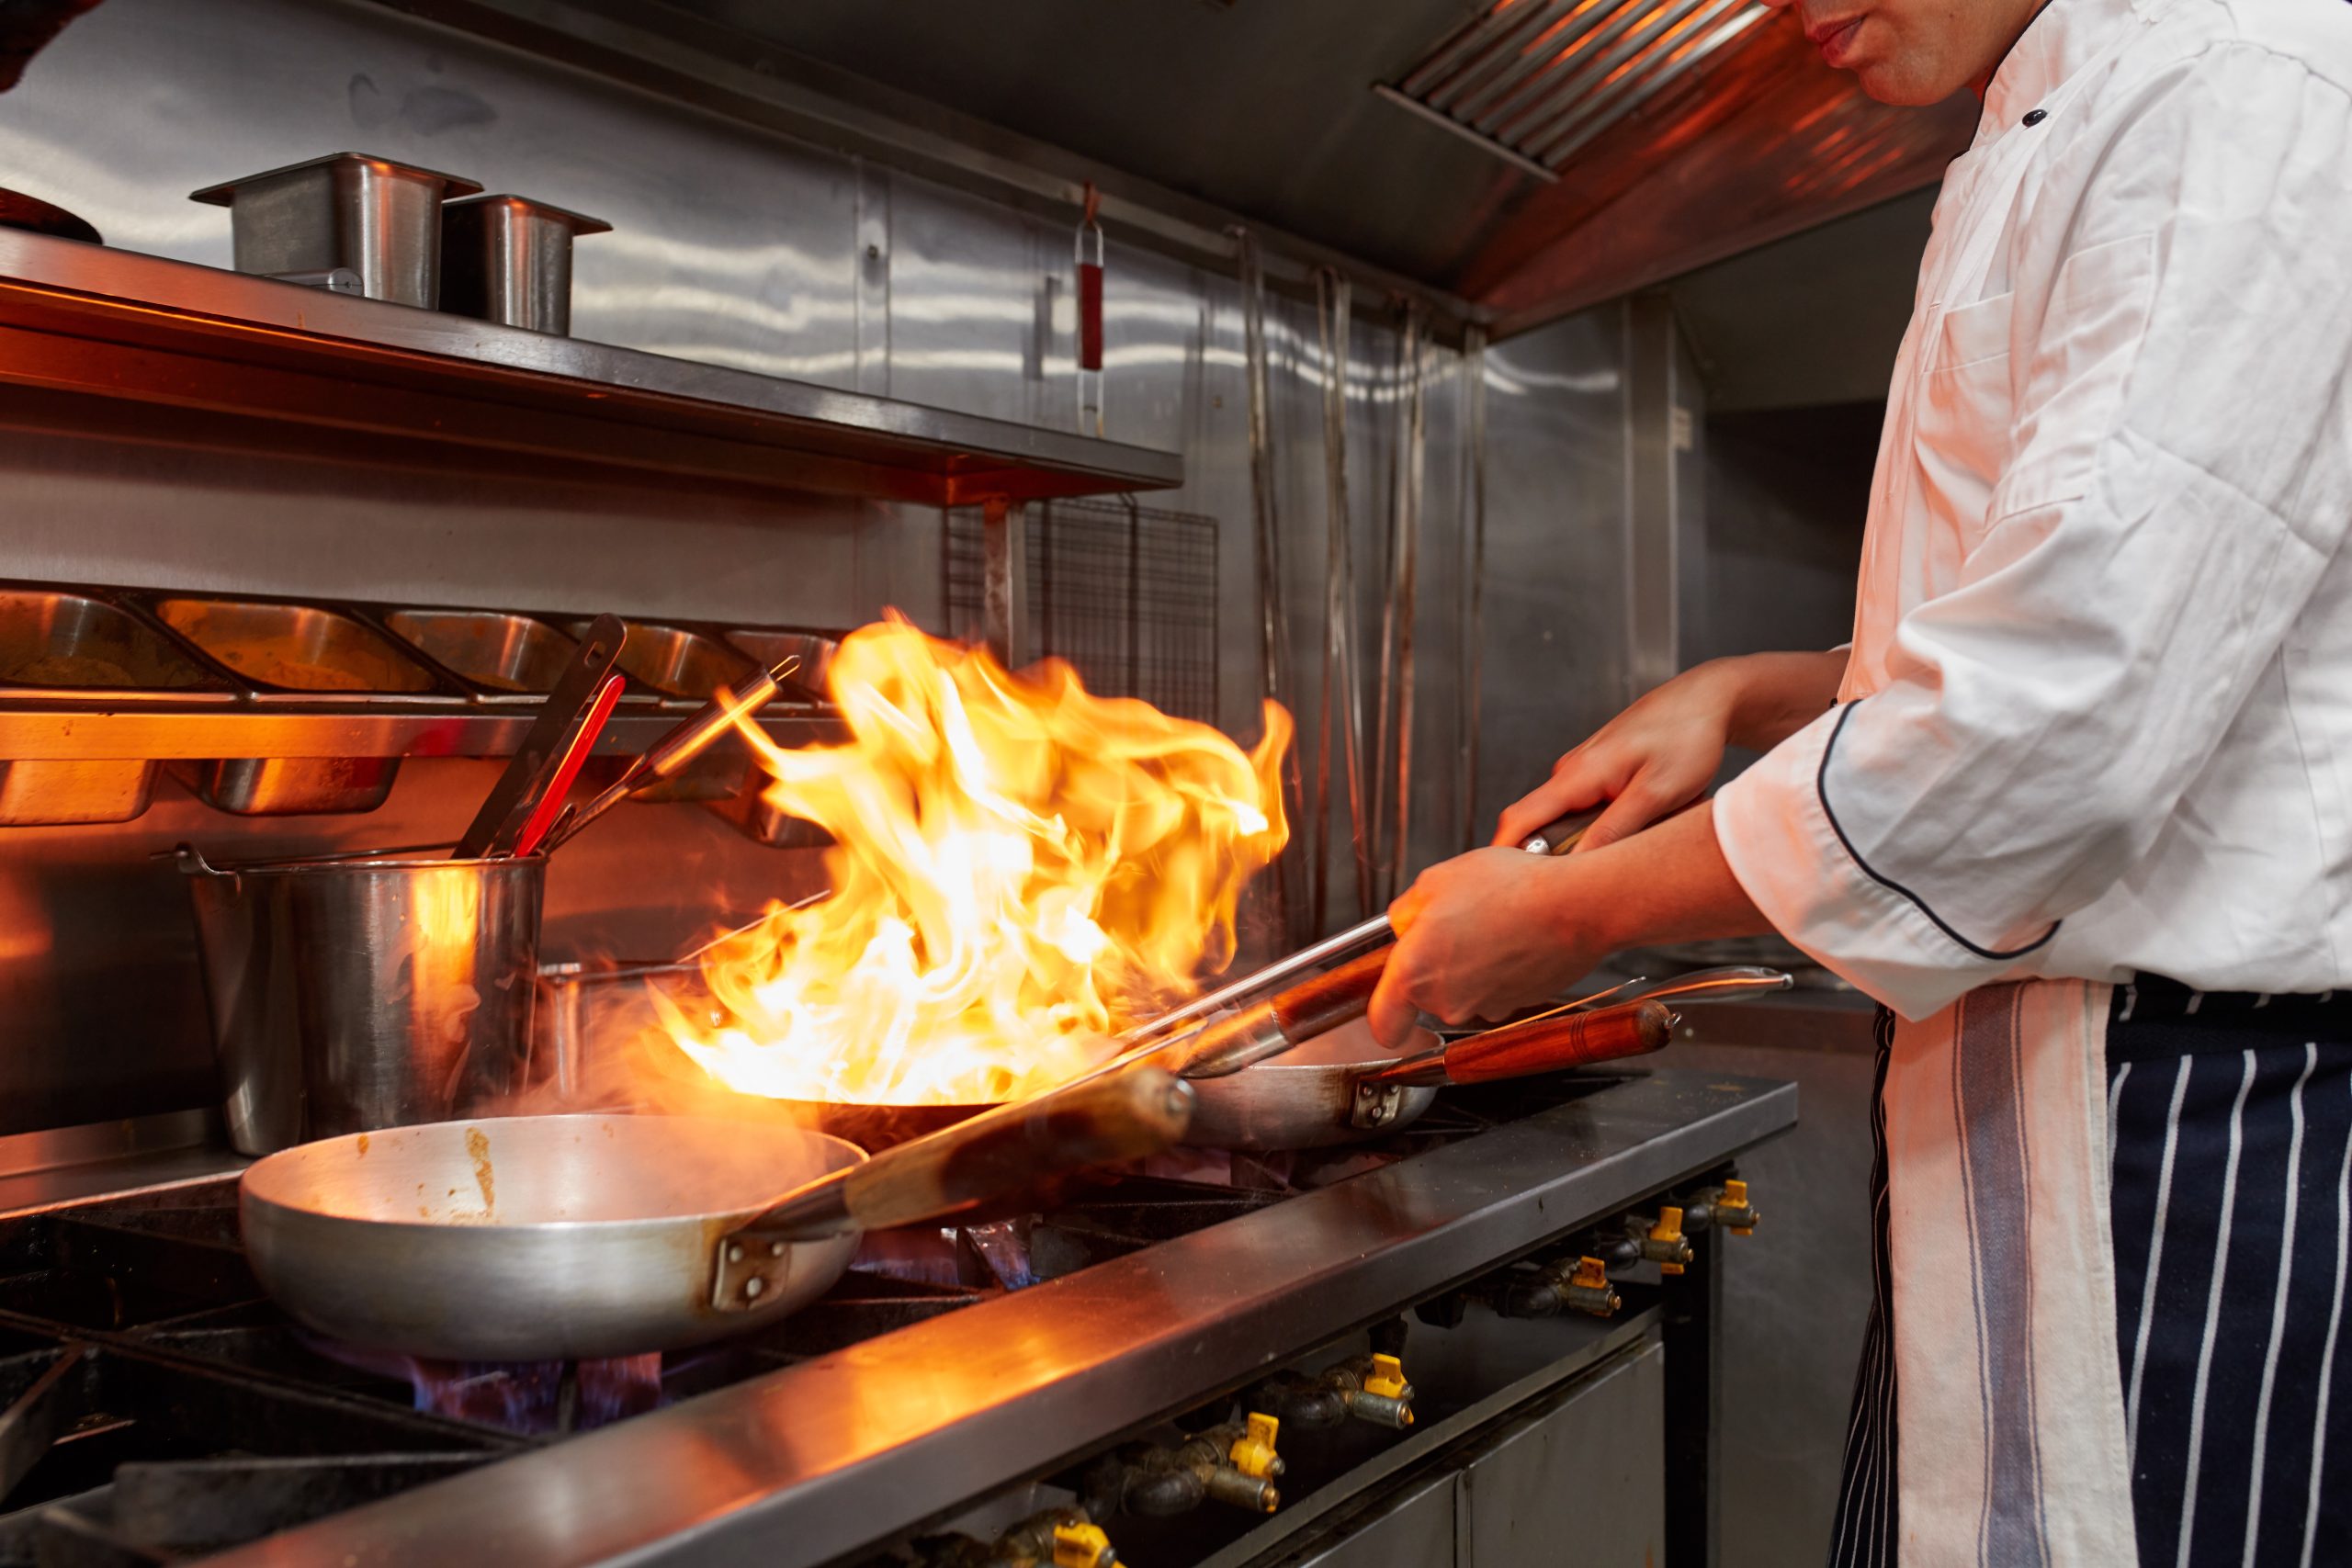 Chef executing flambé technique with fiery pan in kitchen.